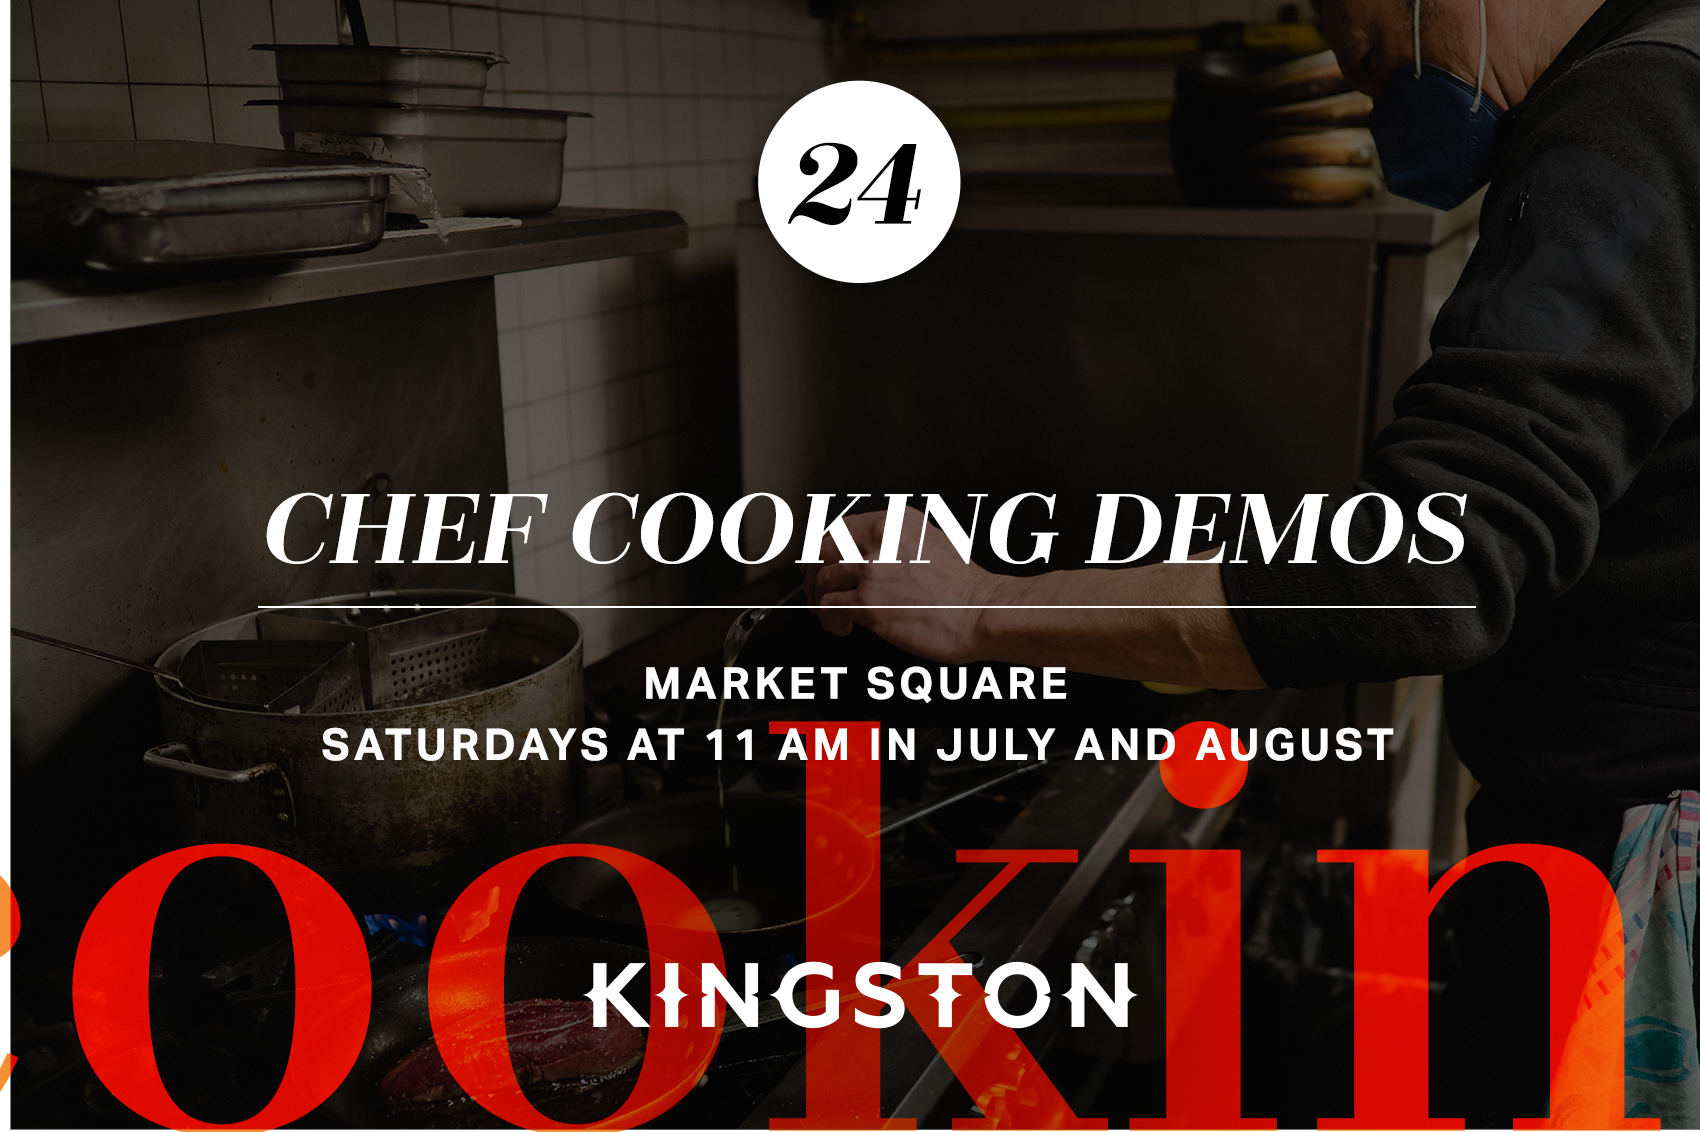 Chef cooking demos